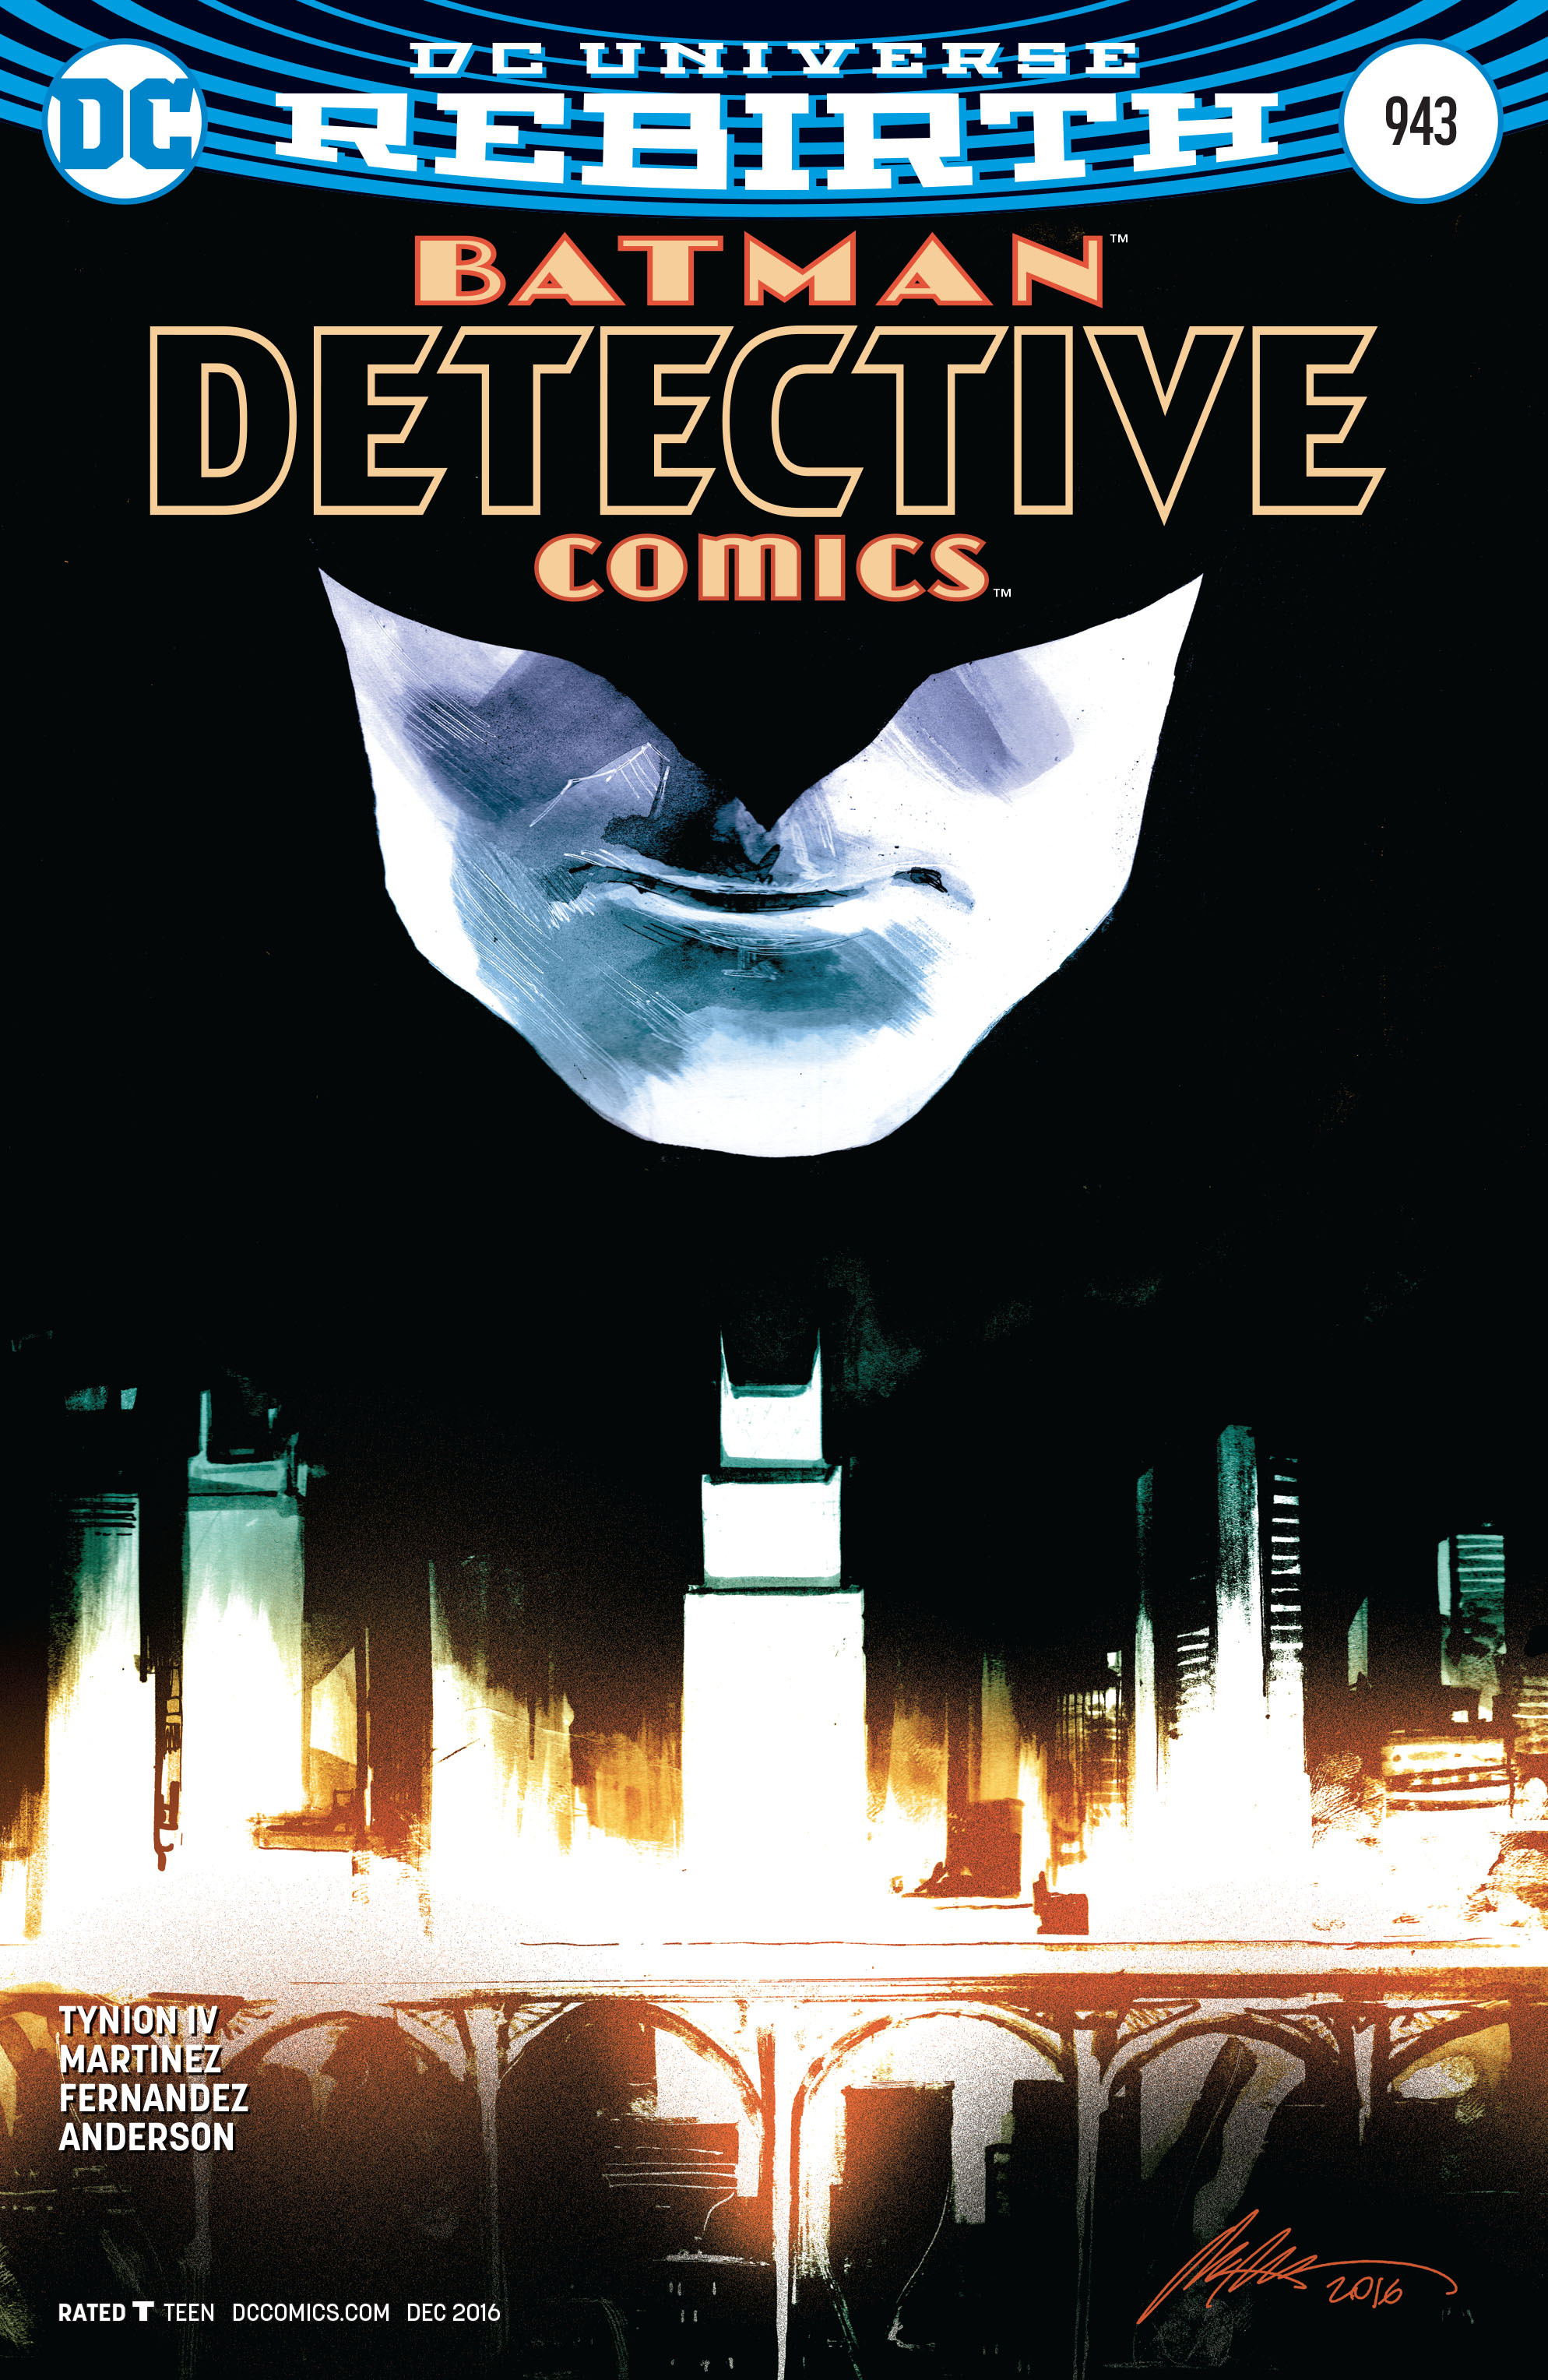 Detective Comics (2016-): Chapter 943 - Page 3